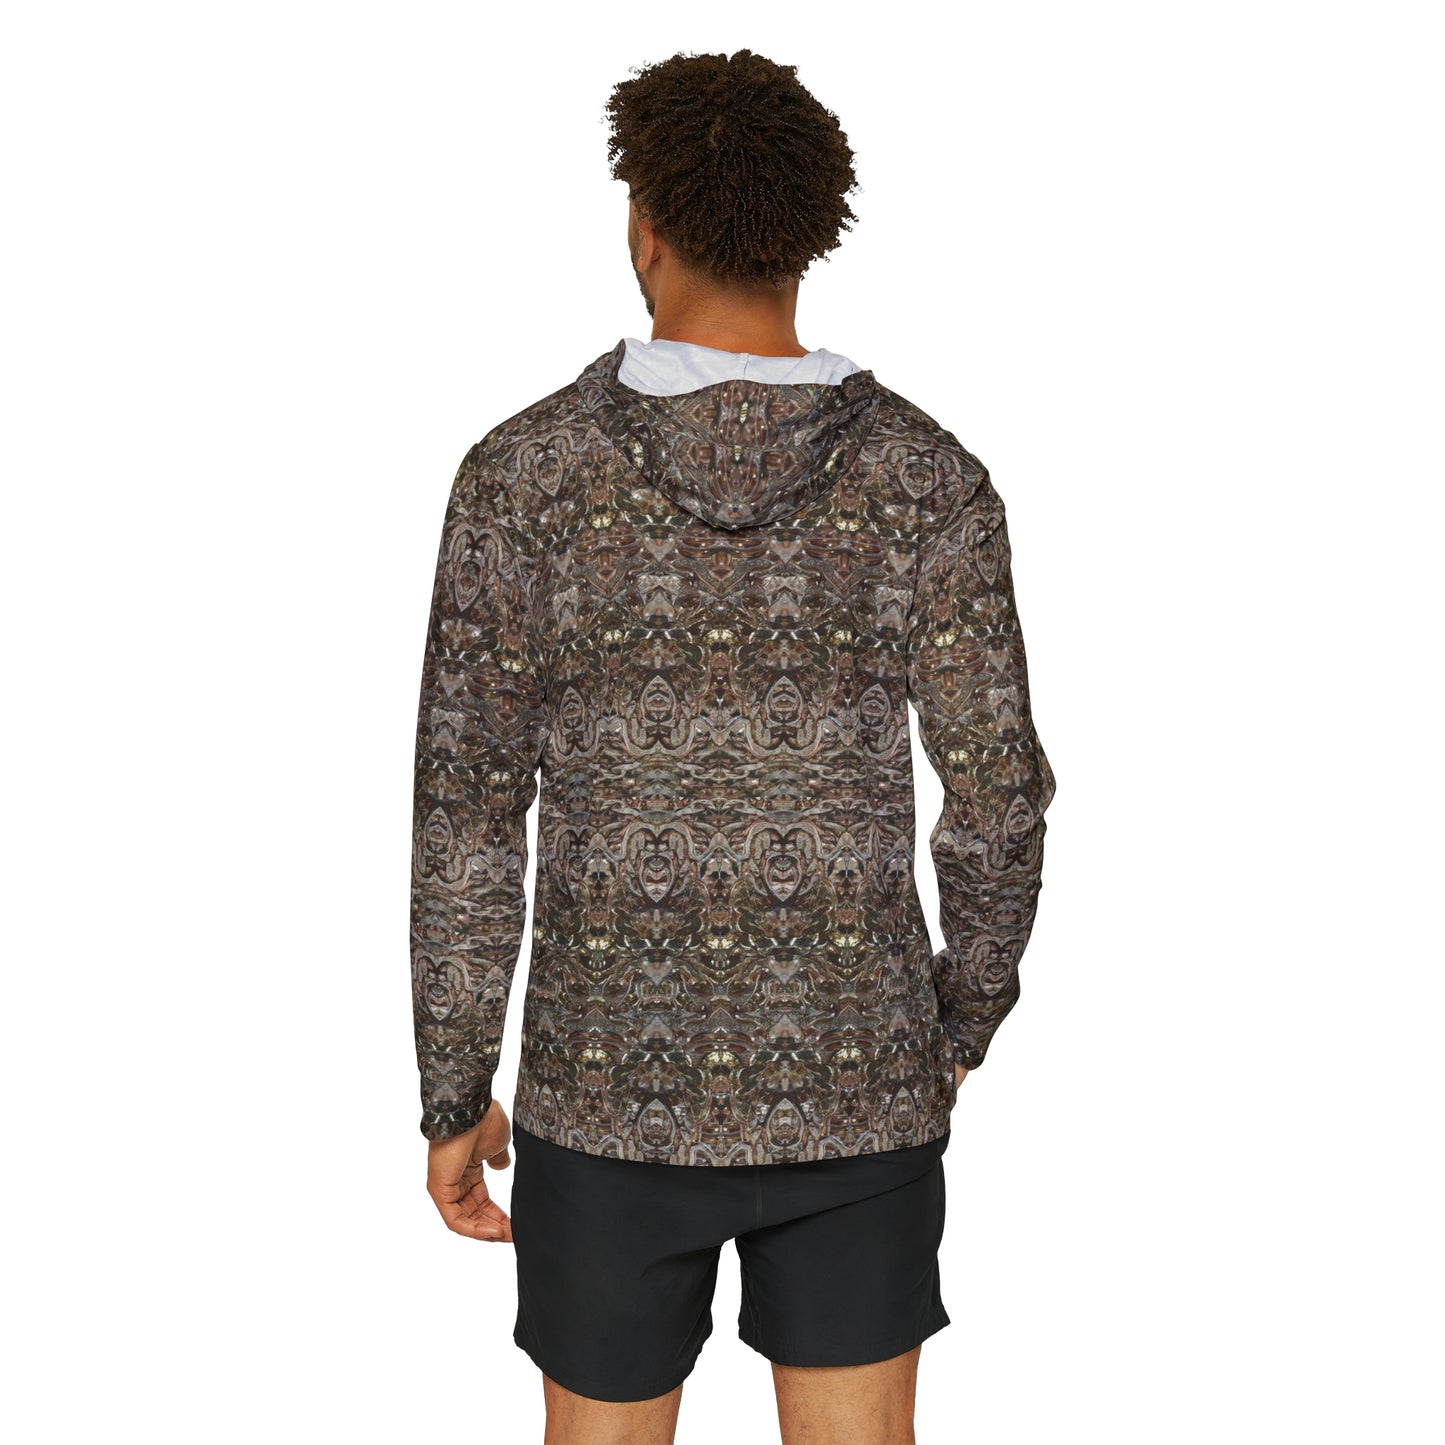 Athletic Activewear Hoodie (His/They)(Samhain Dream Thaw 6 of 15 Sex ex Quindecim) RJSTH@w2023 RJS